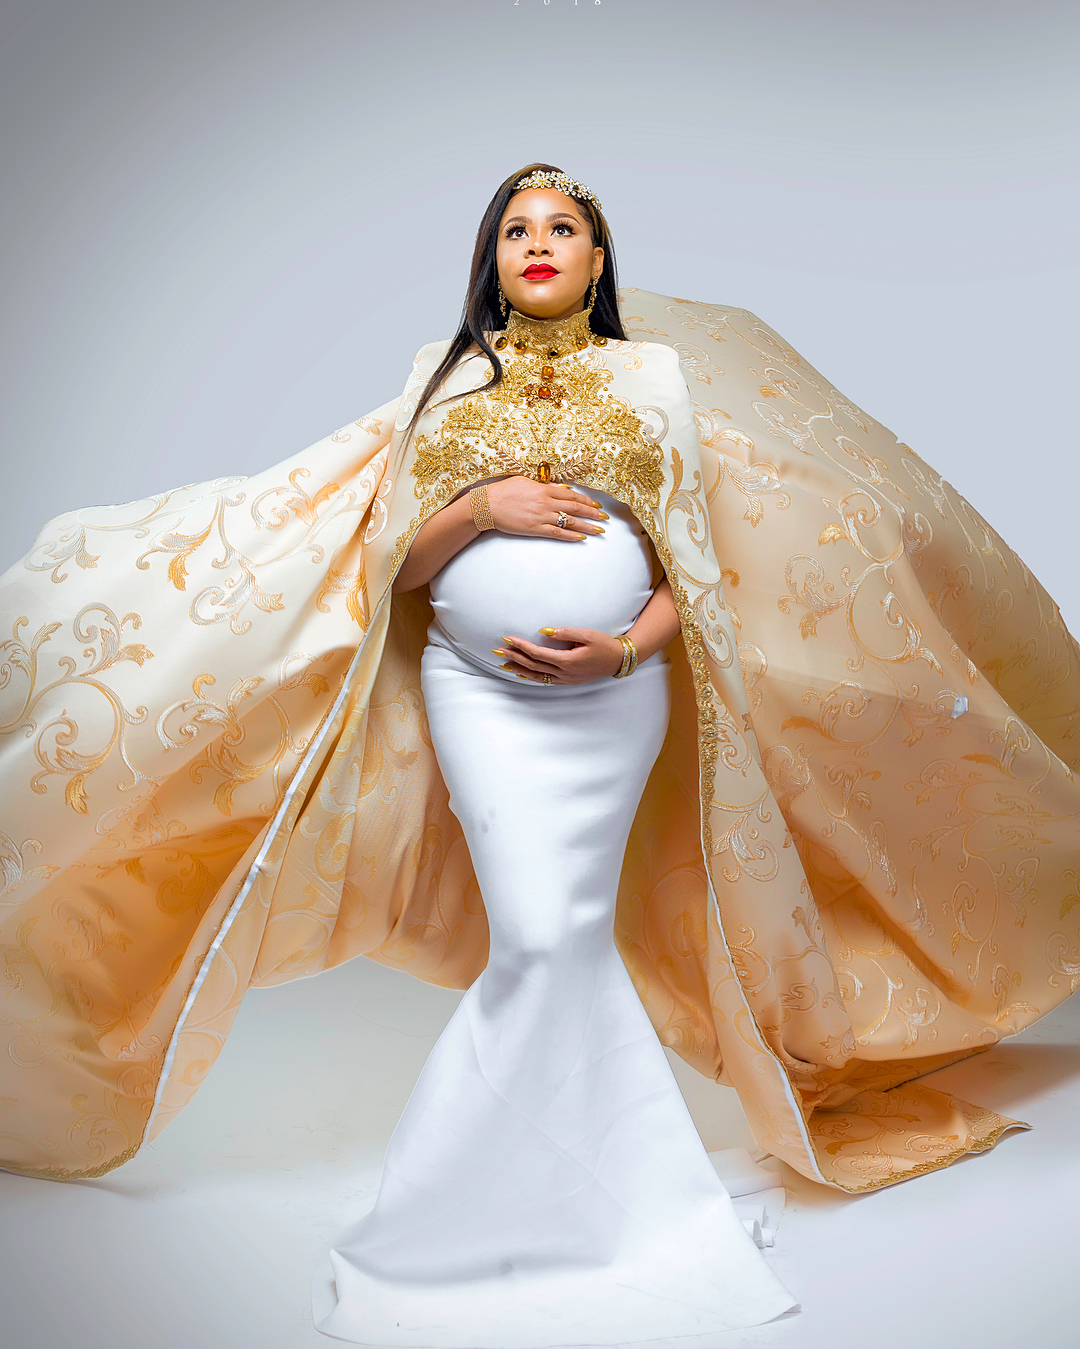 Fani Kayode and wife expecting triplets, Peep her stunning maternity photos